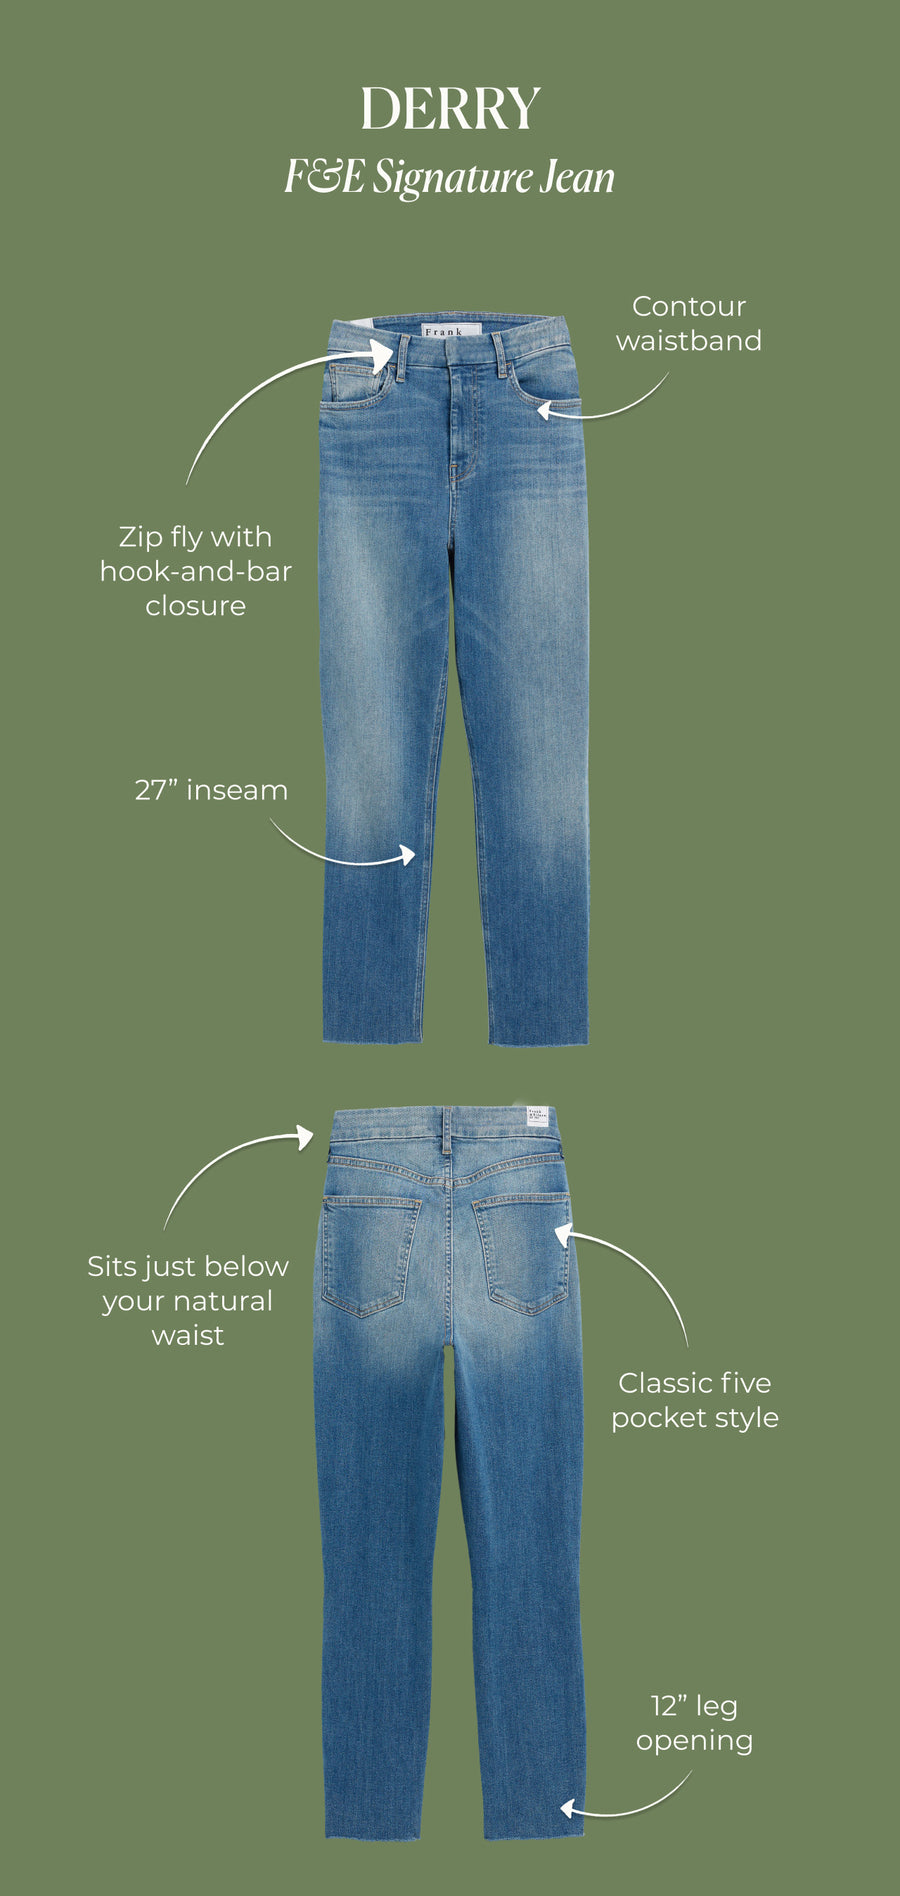 Frank & Eileen Jeans: A Guide